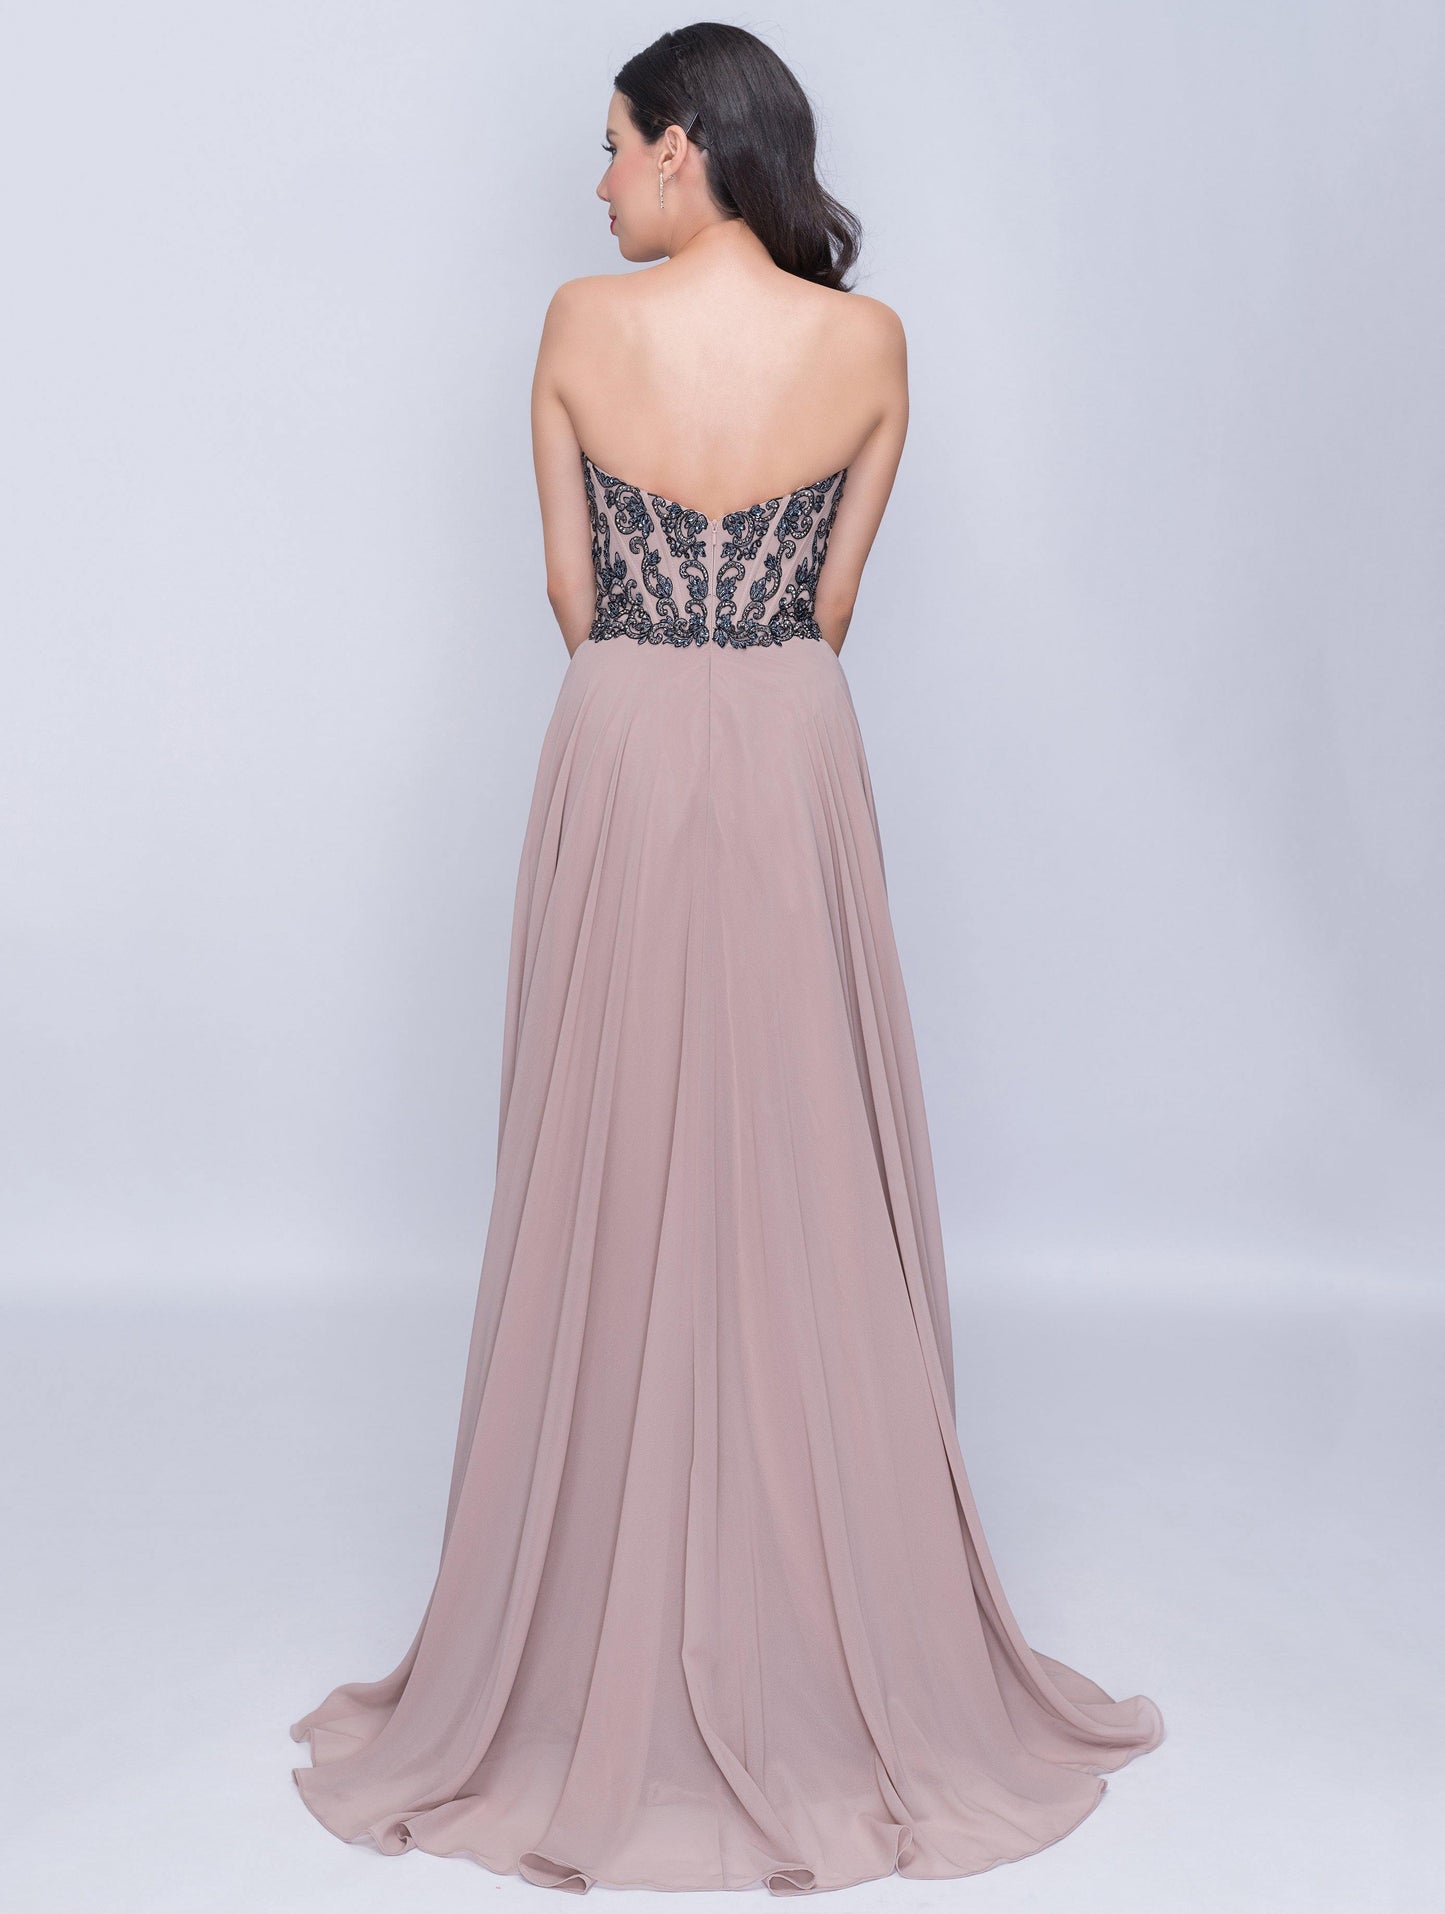 Nina Canacci Prom Long Strapless Beaded Dress 3140 - The Dress Outlet